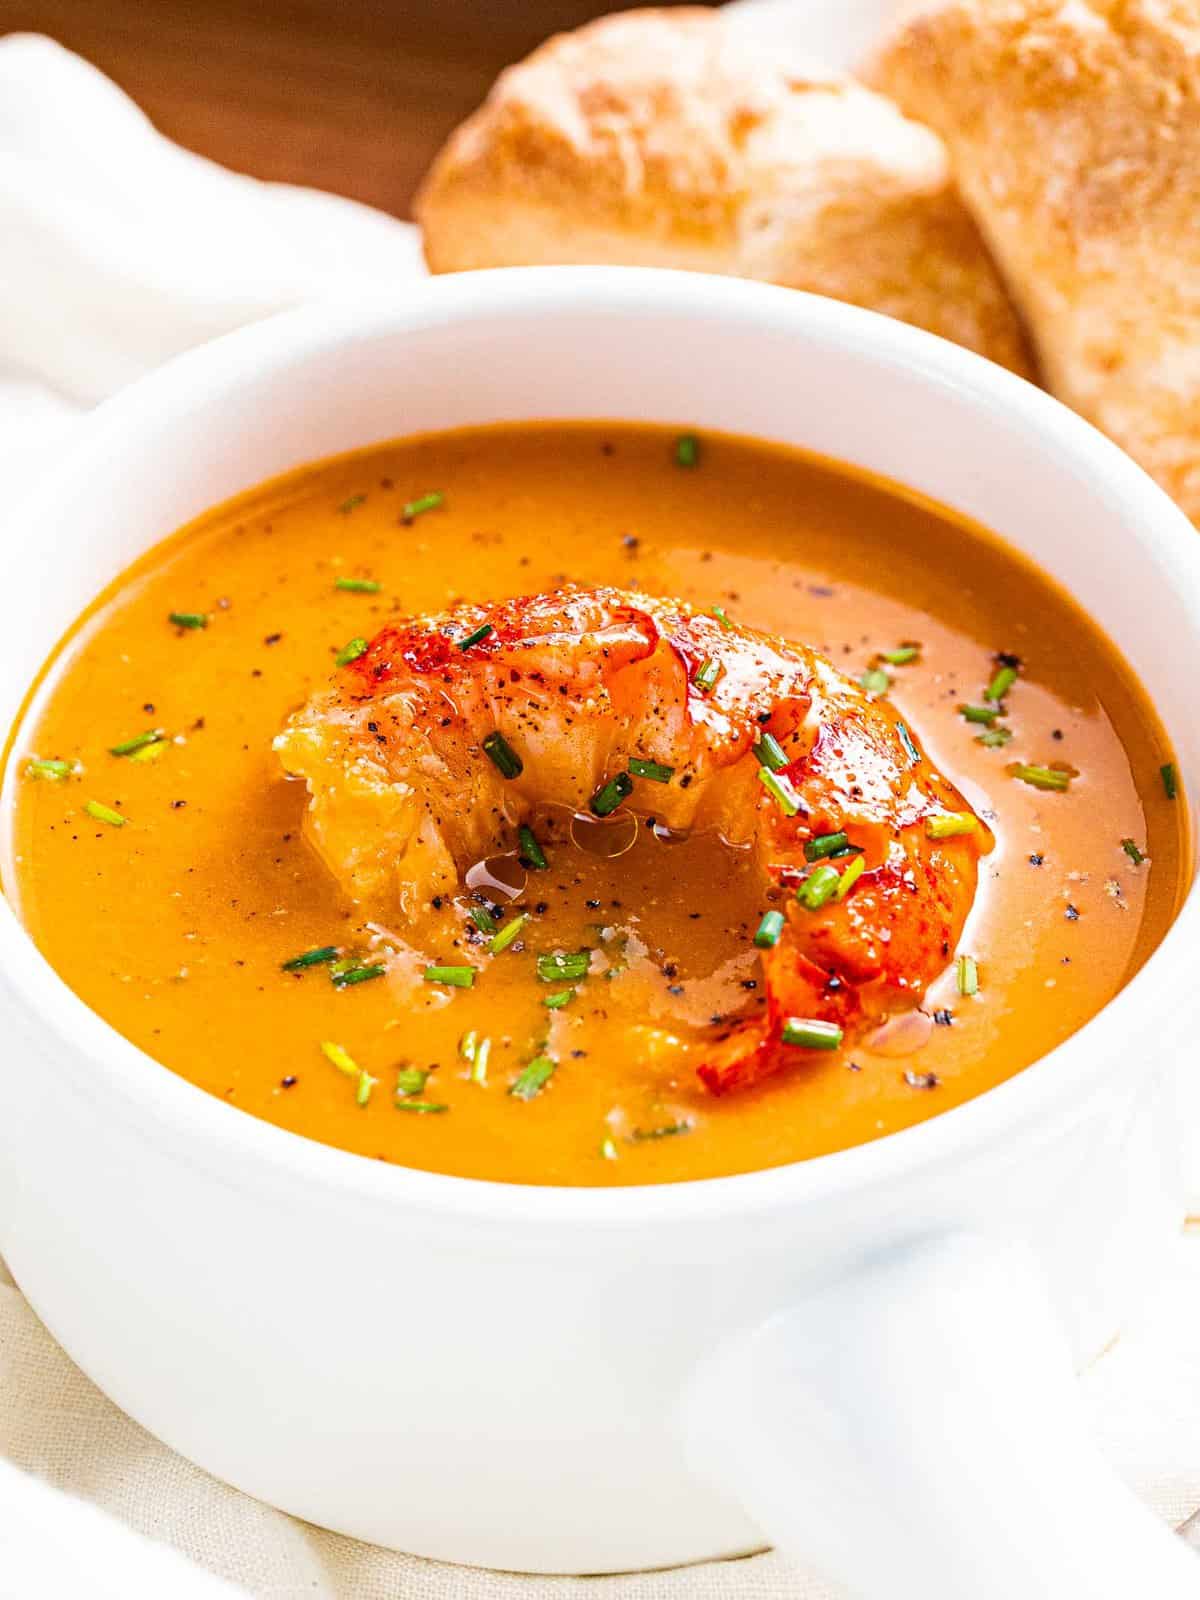 A bowl of lobster bisque garnished with buttered lobster tail and chives.